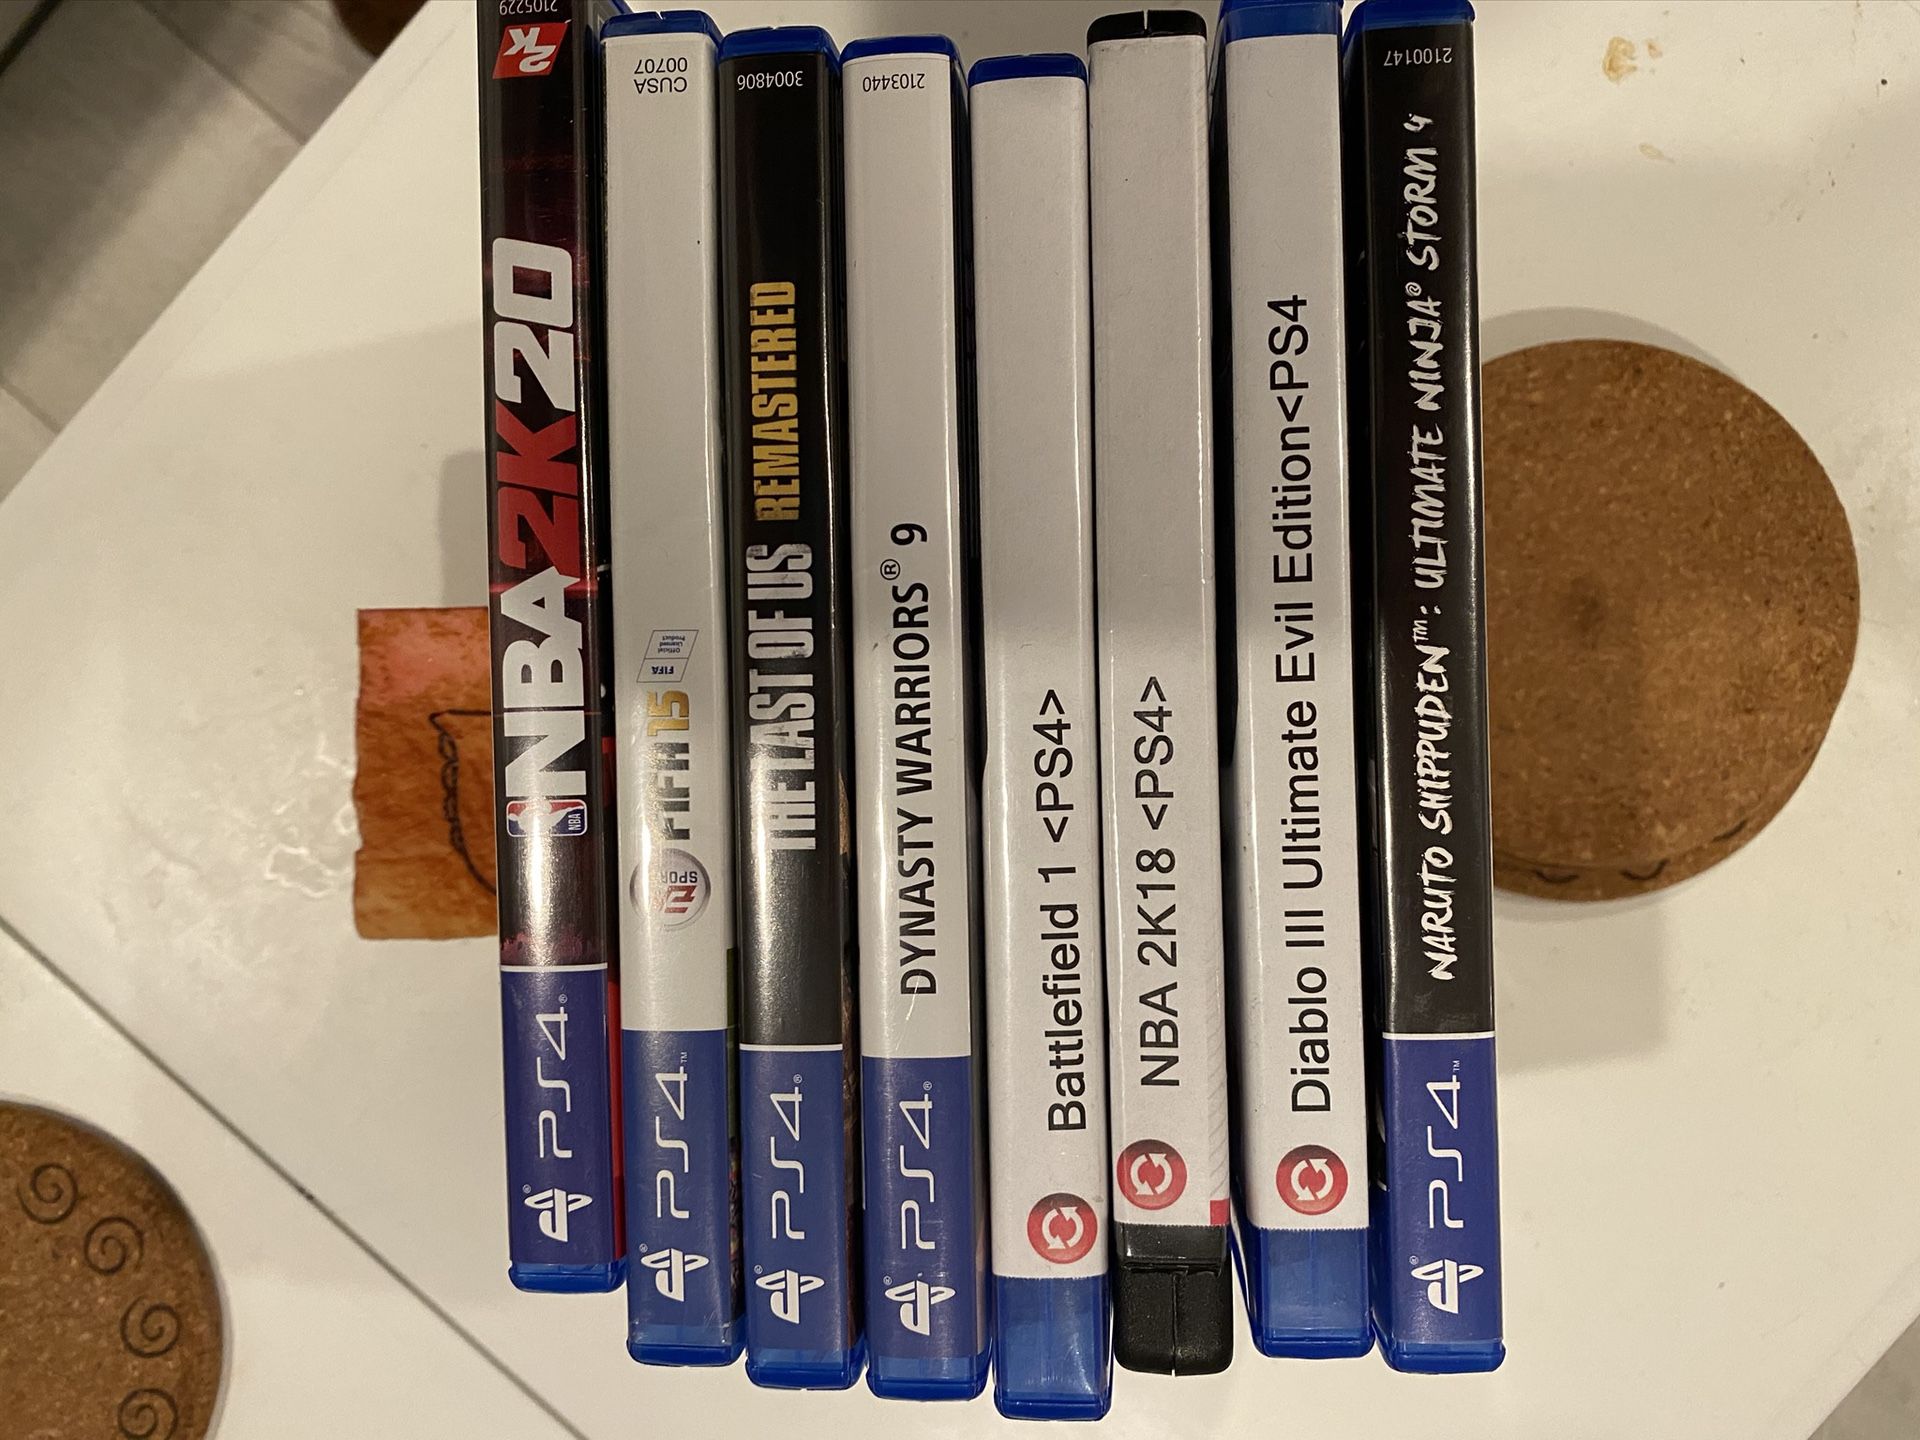 PS4 games all for $60!!!